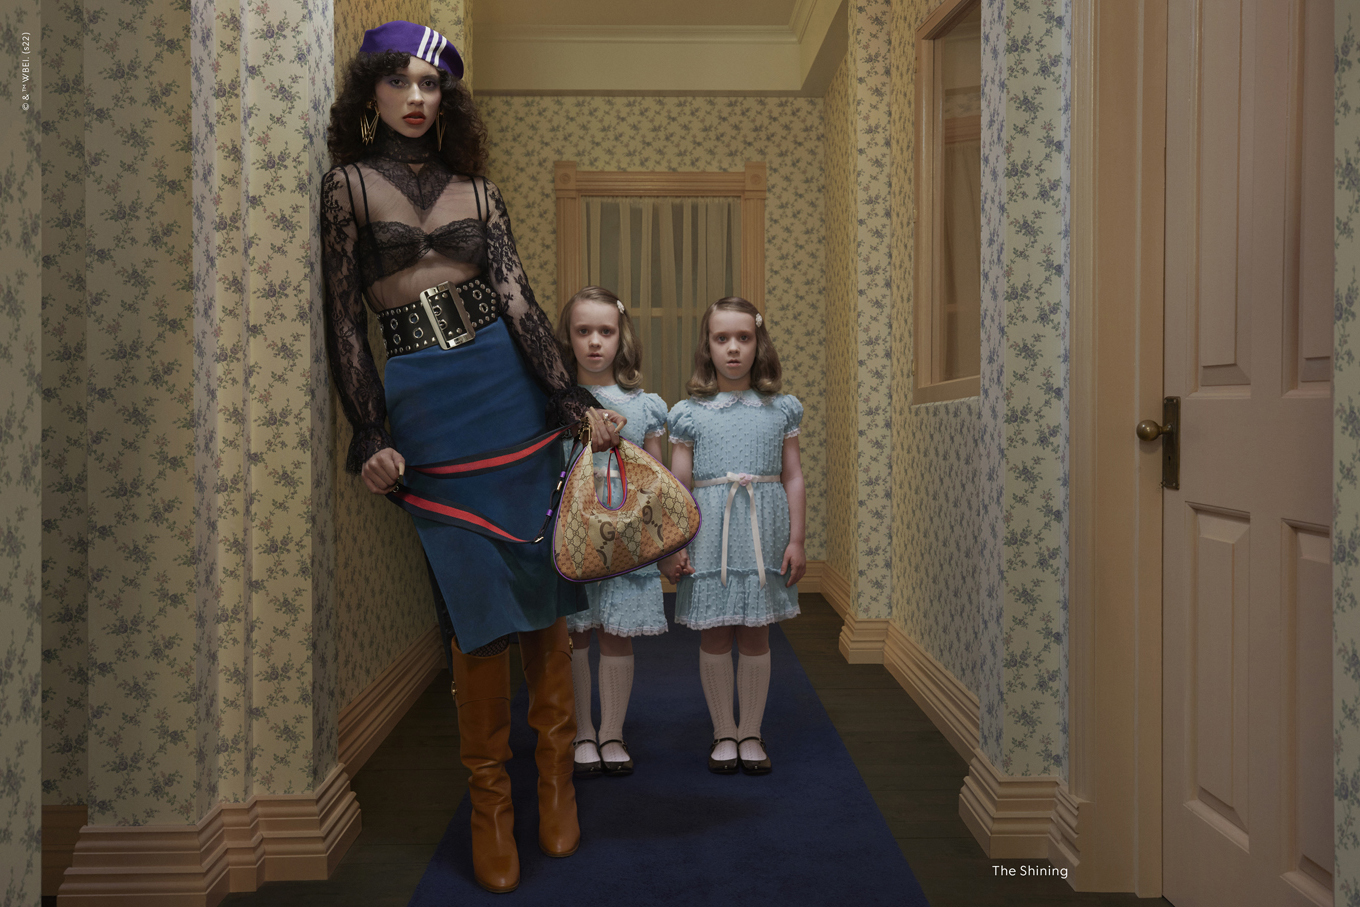 Gucci's Stanley Kubrick Campaign References 'The Shining,' '2001'